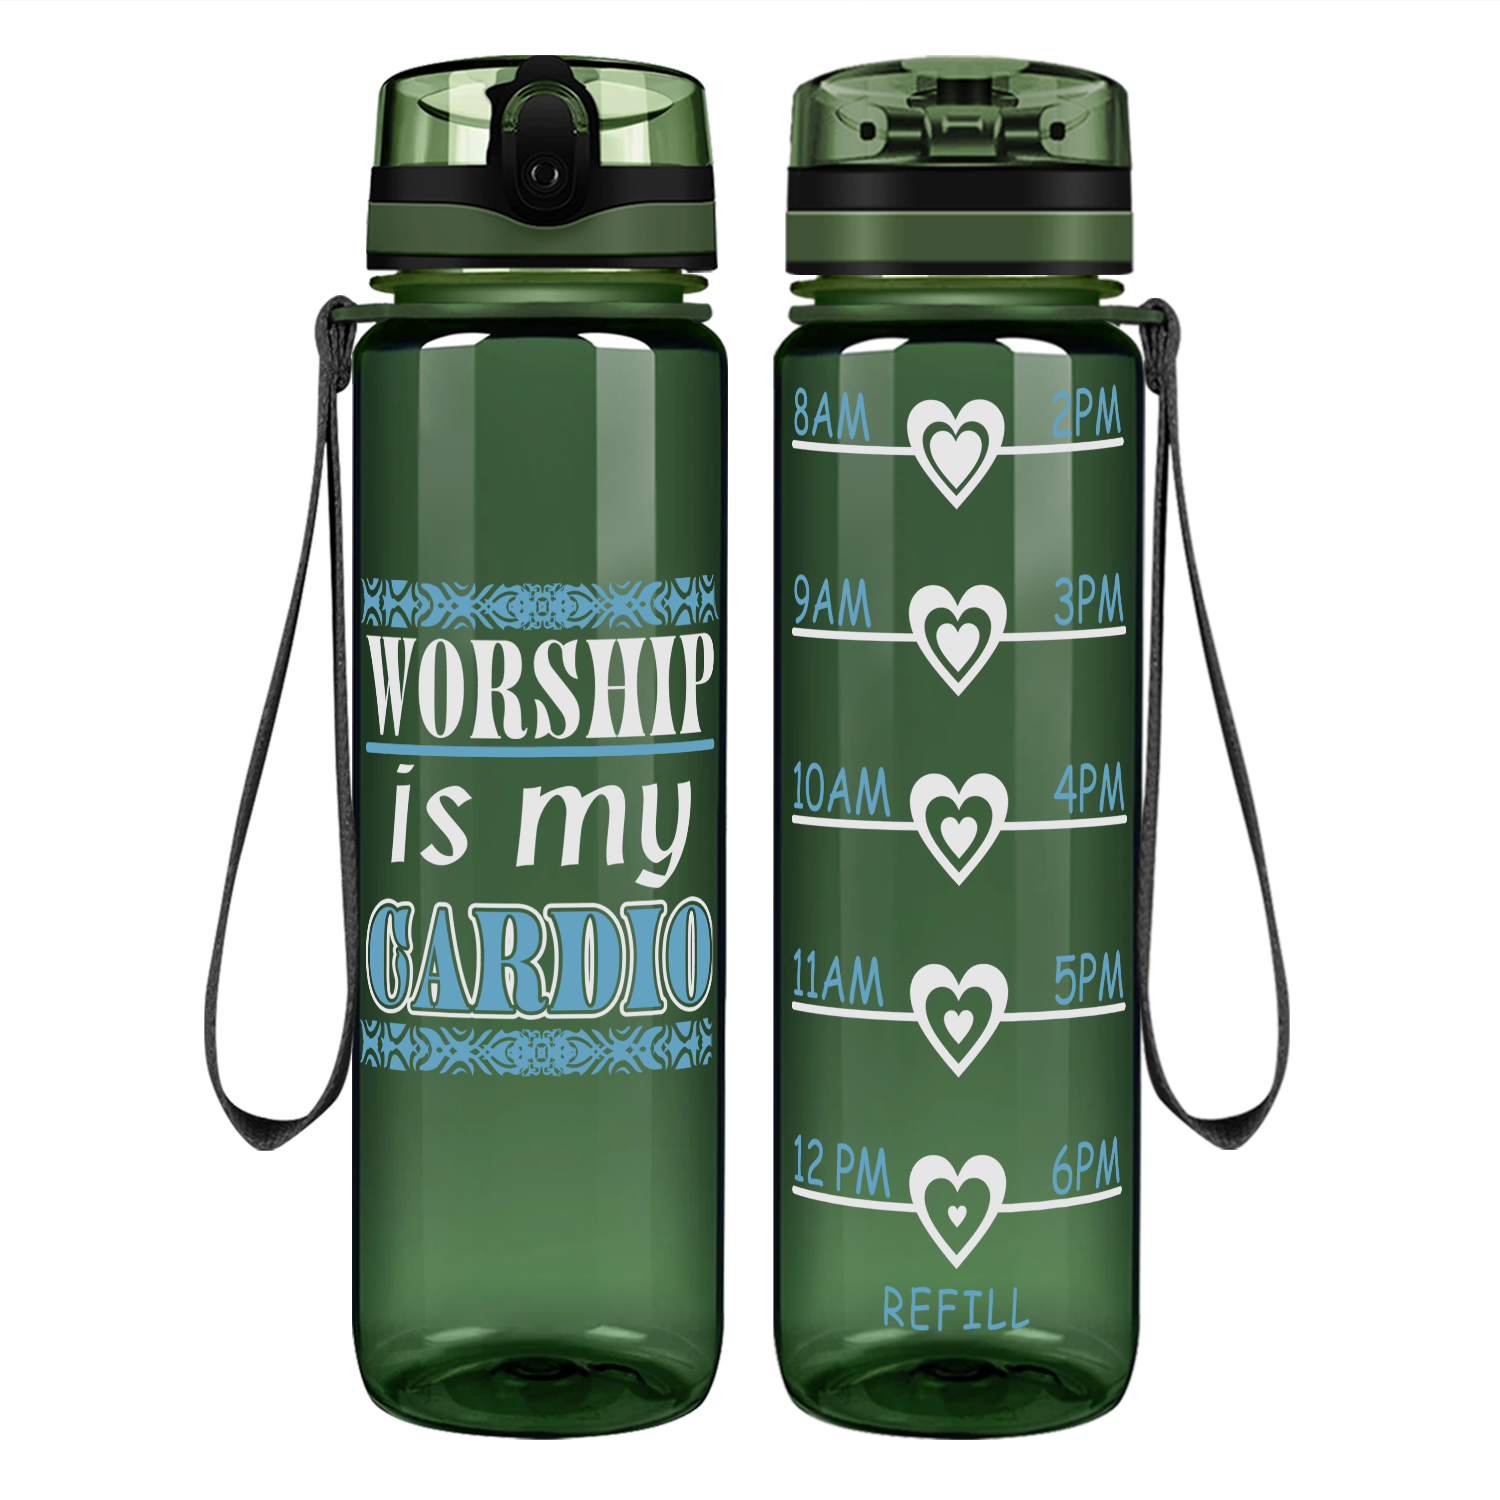 Hustle For That Muscle - Personalized Gifts Custom Fitness Tumbler